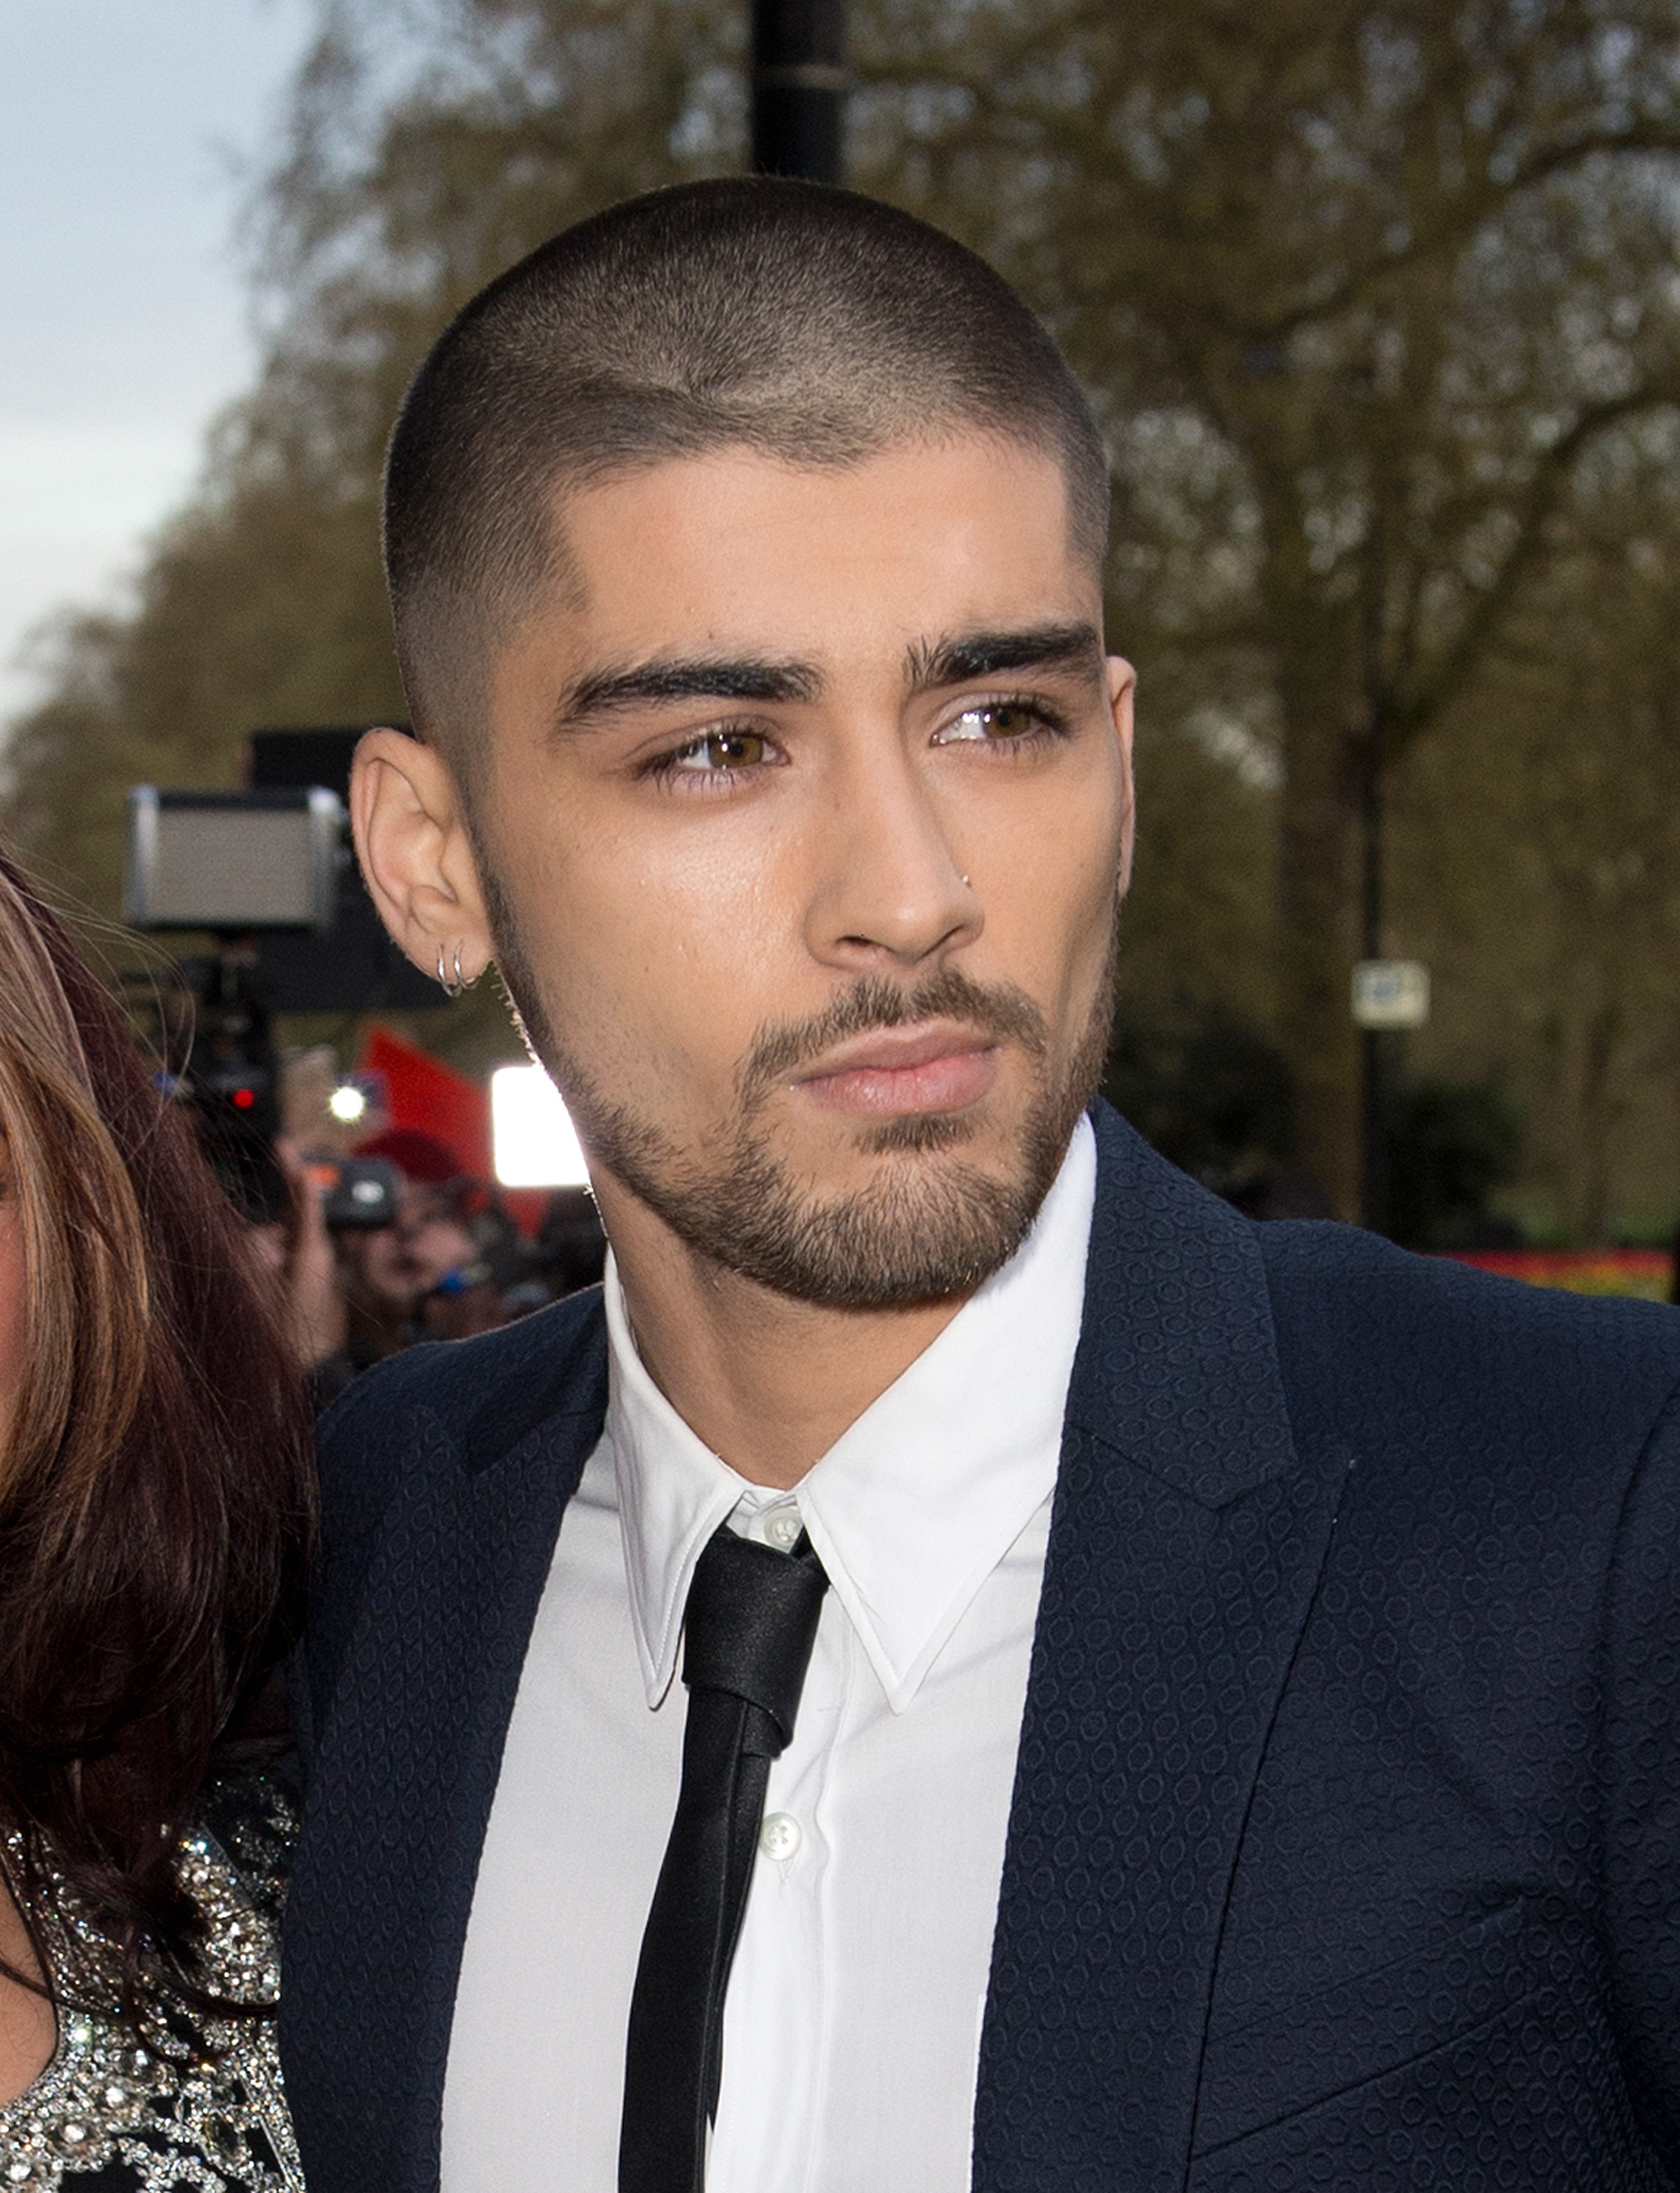 Zayn Malik arriving at the 2015 Asian Awards at the Grosvenor House Hotel in London